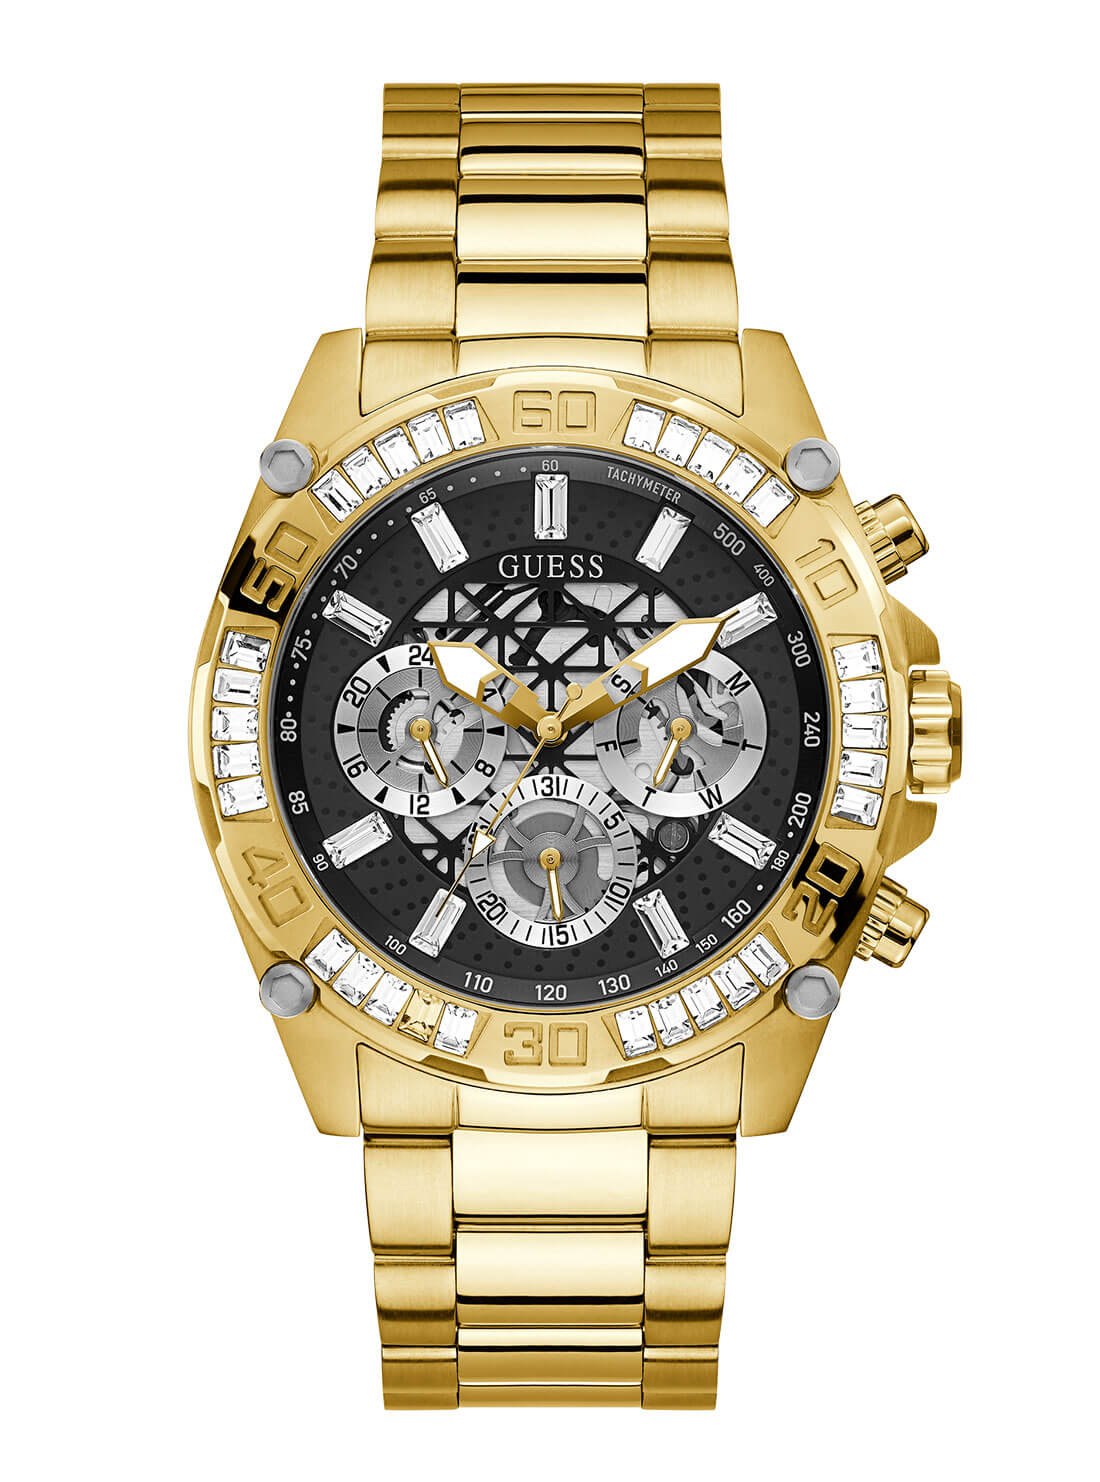 GUESS Mens Gold Trophy Watch GW0390G2 Front View